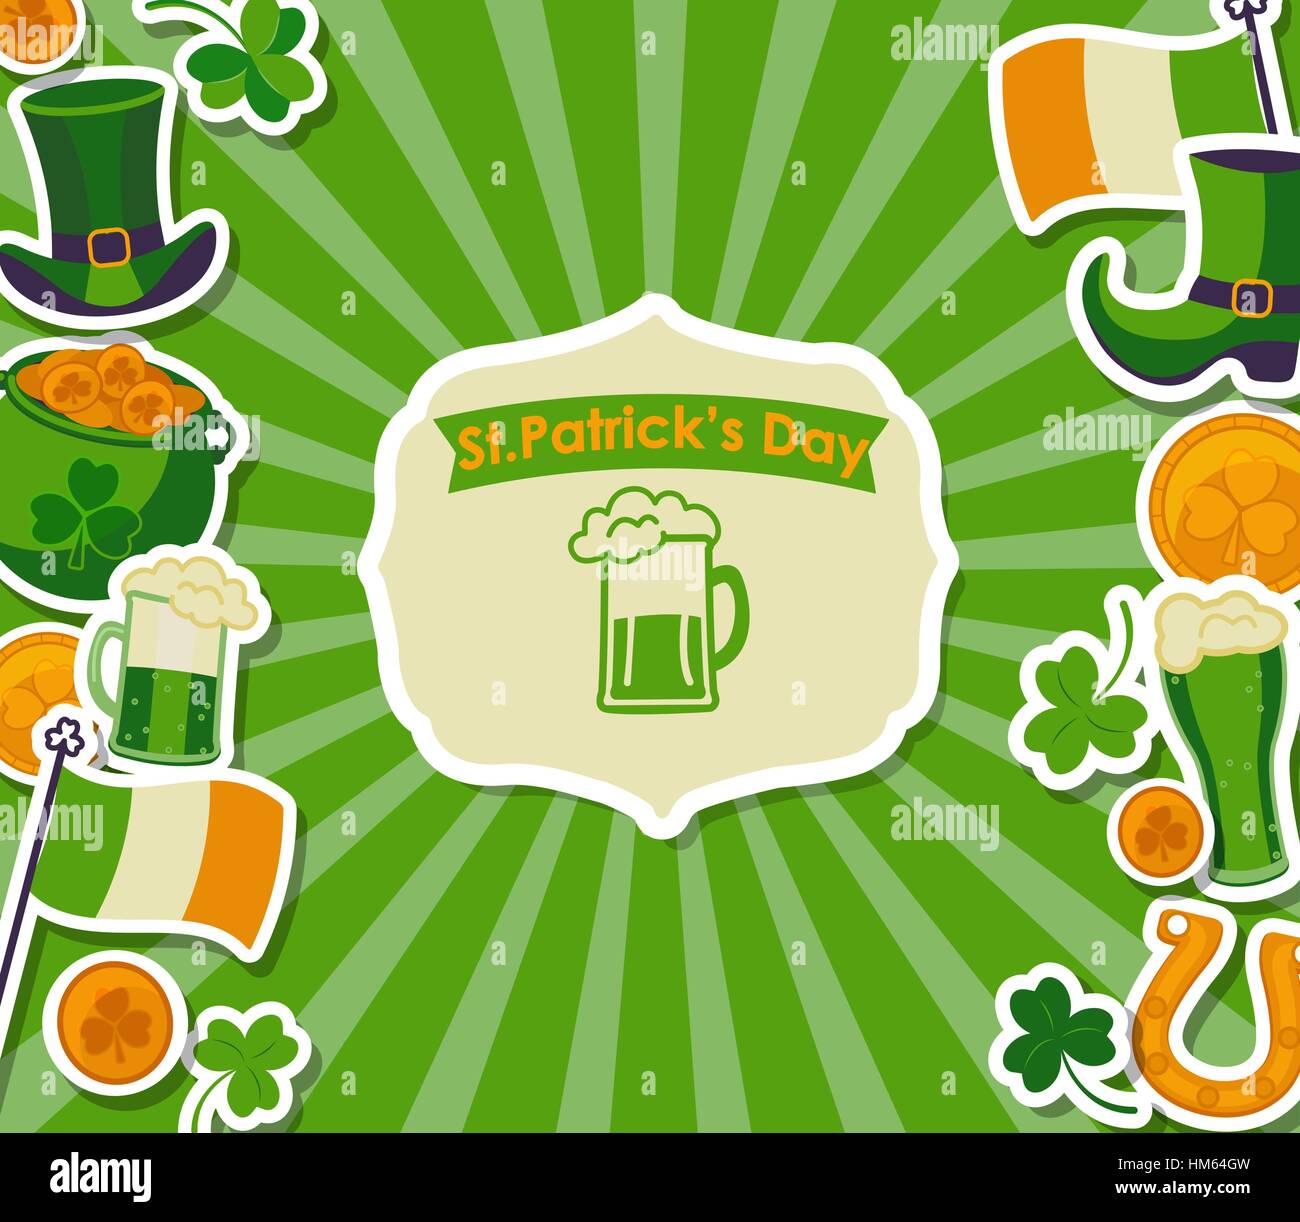 St Patrick's day greeting card, vector illustration. Stock Vector